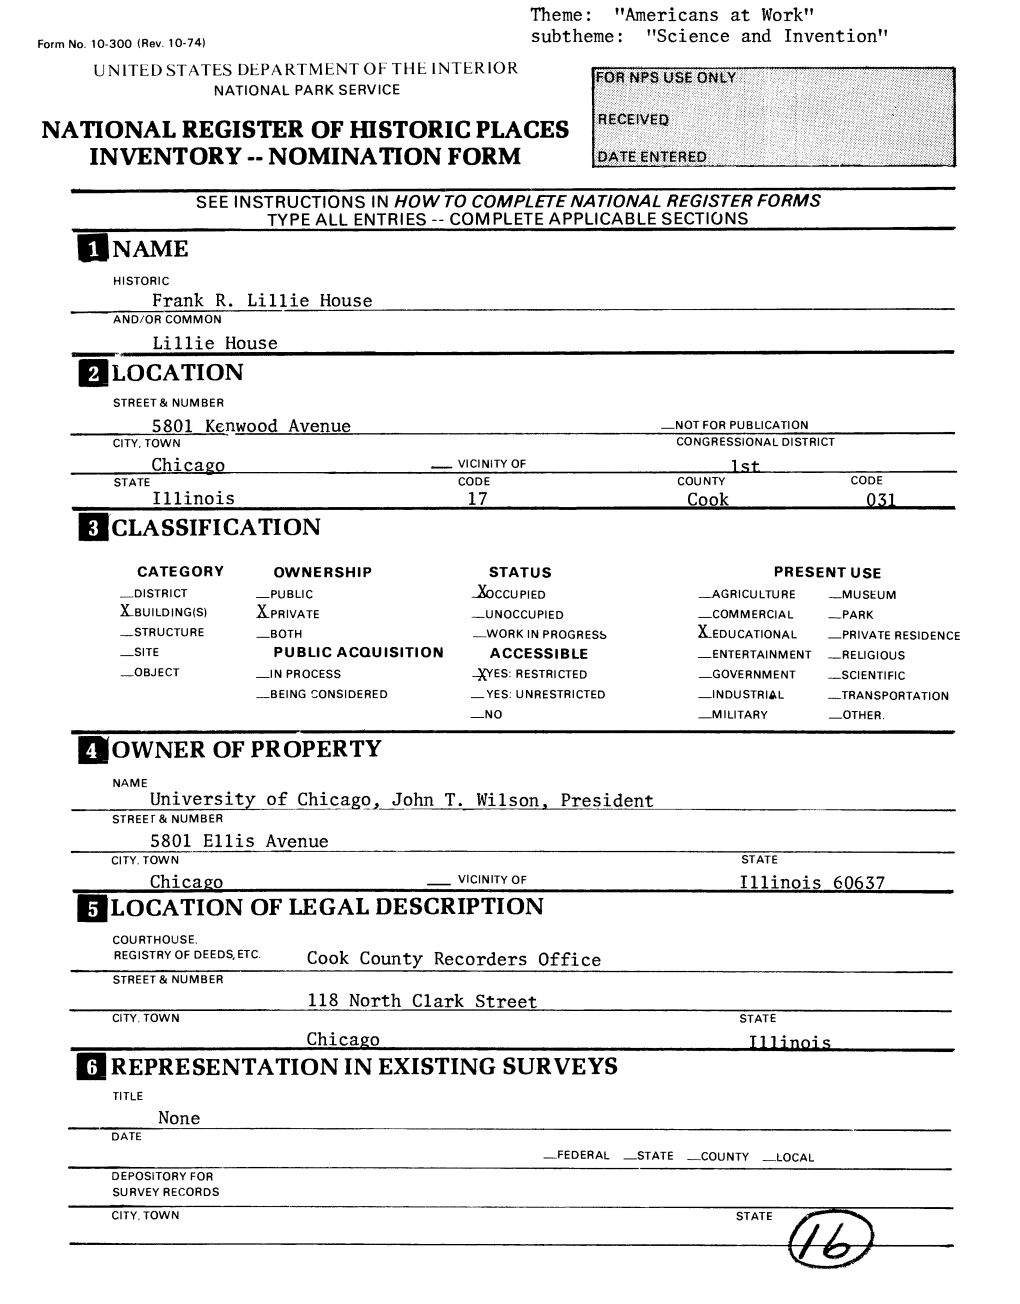 National Register of Historic Places Inventory - Nomination Form